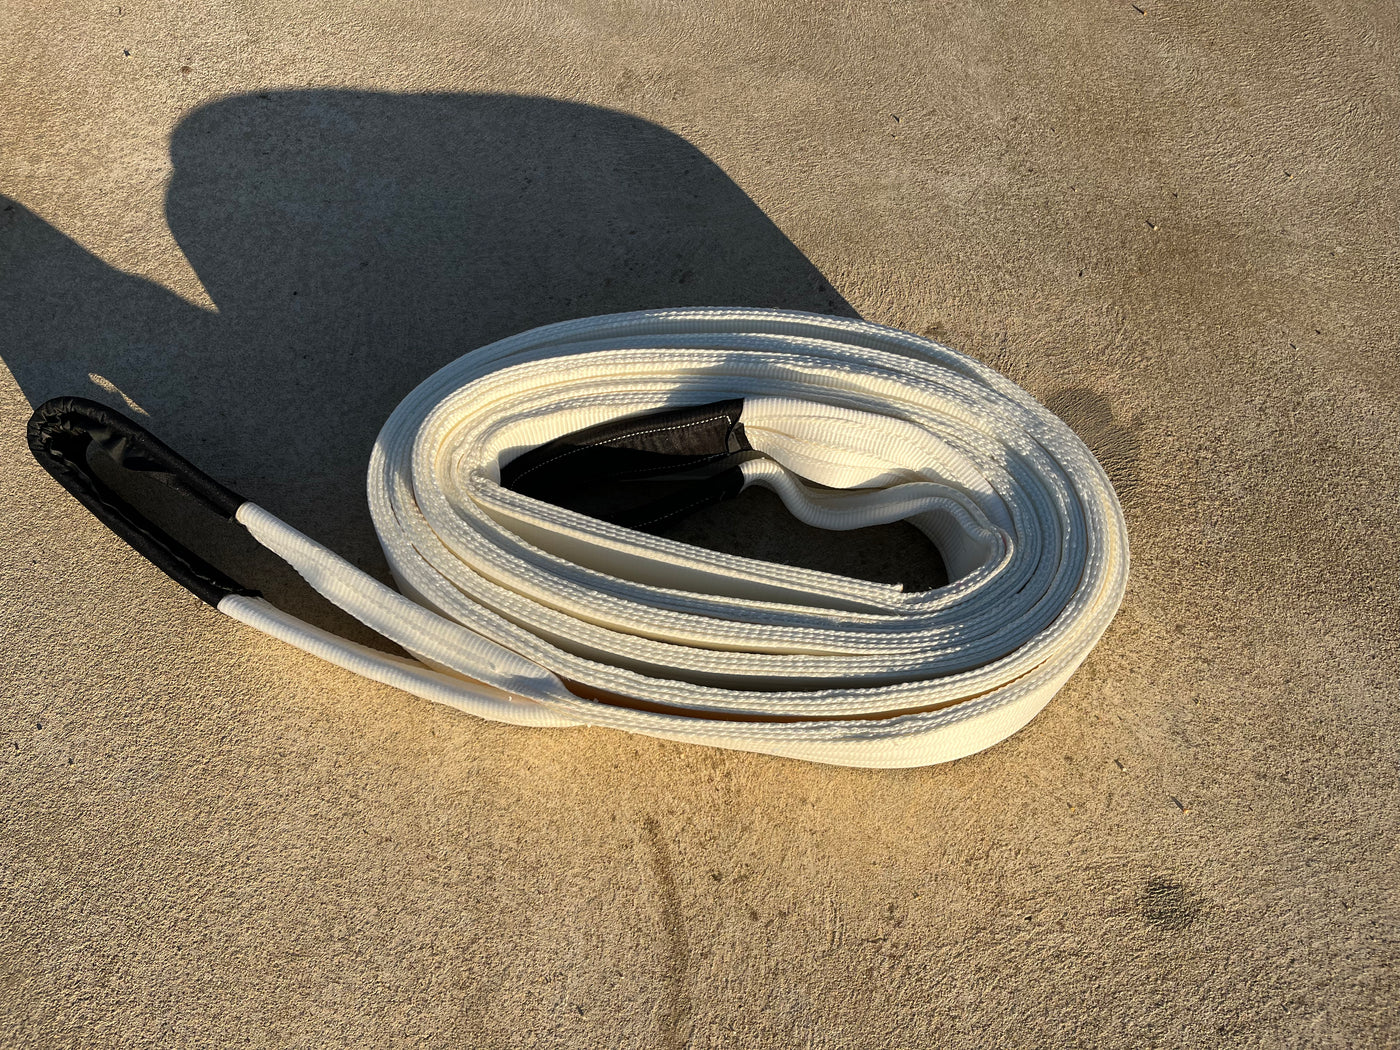 60 Tonne Snatch Straps - High Strength Nylon Webbing - Safe & Effective Towing Solution